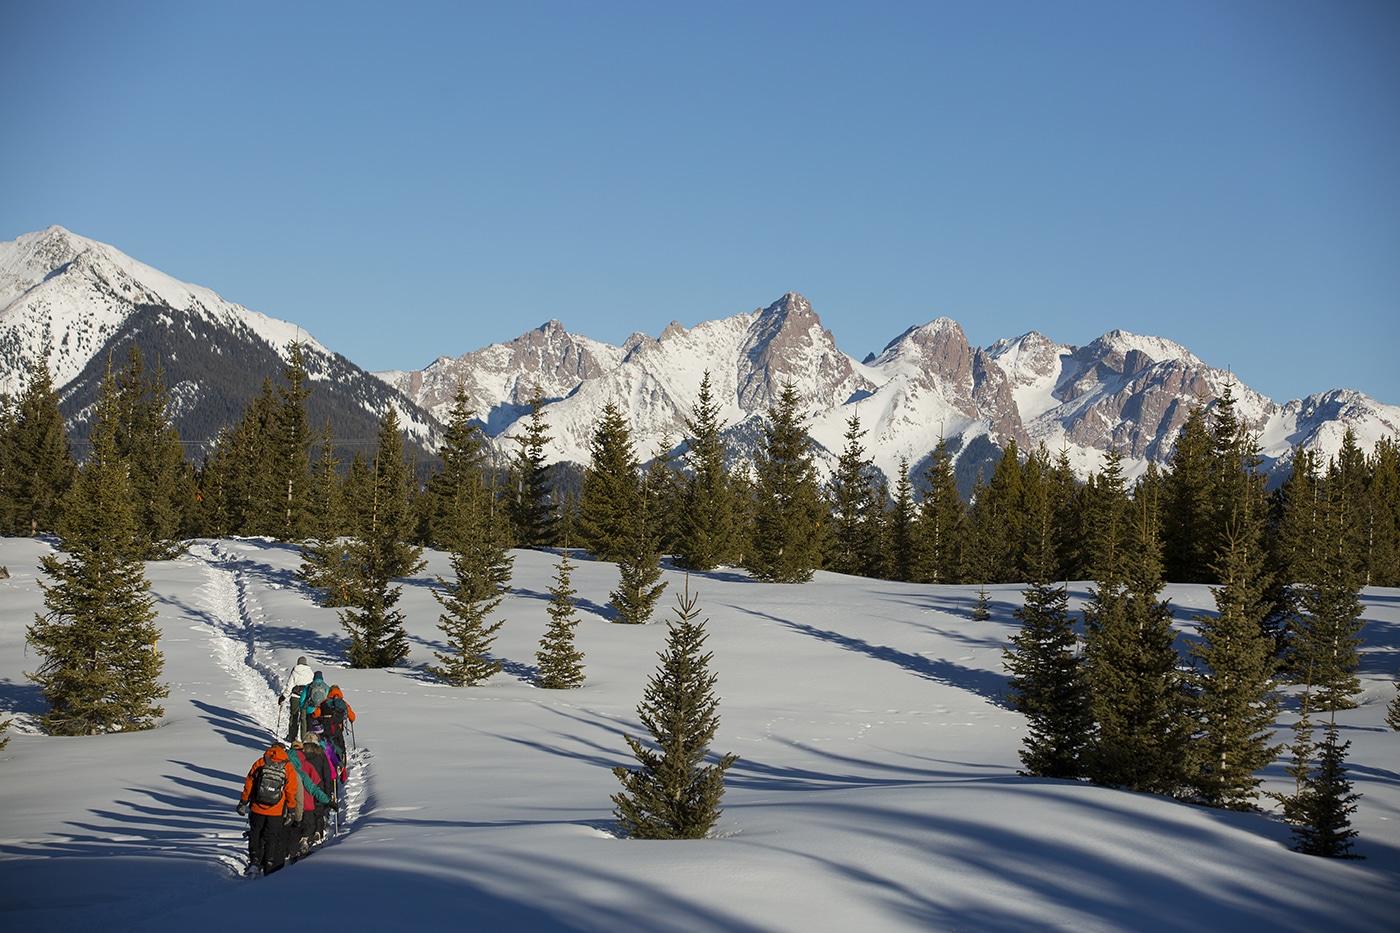 Snowshoe tour leads a group to a beautiful overlook of the Needles Mountain Range